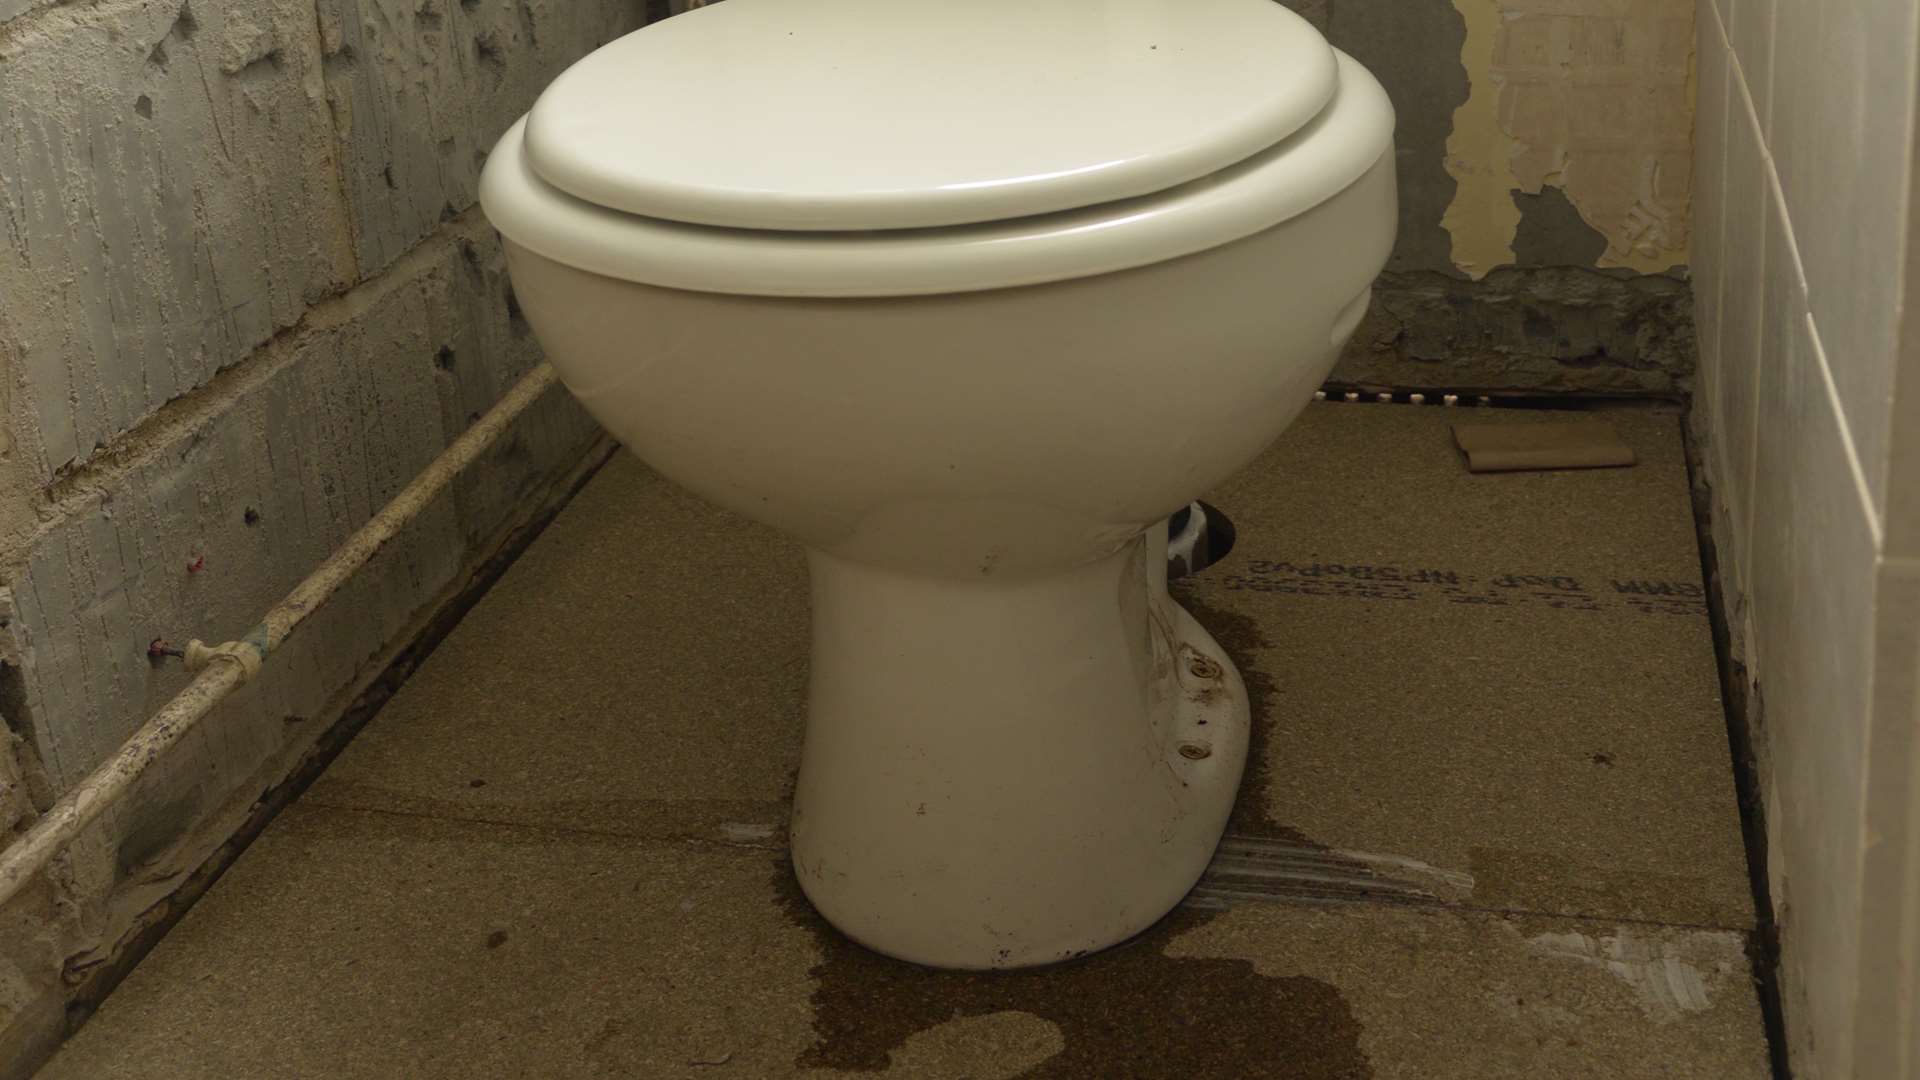 The toilet leaks when it is flushed, sending dirty water over the floor. Picture: Ruth Cuerden